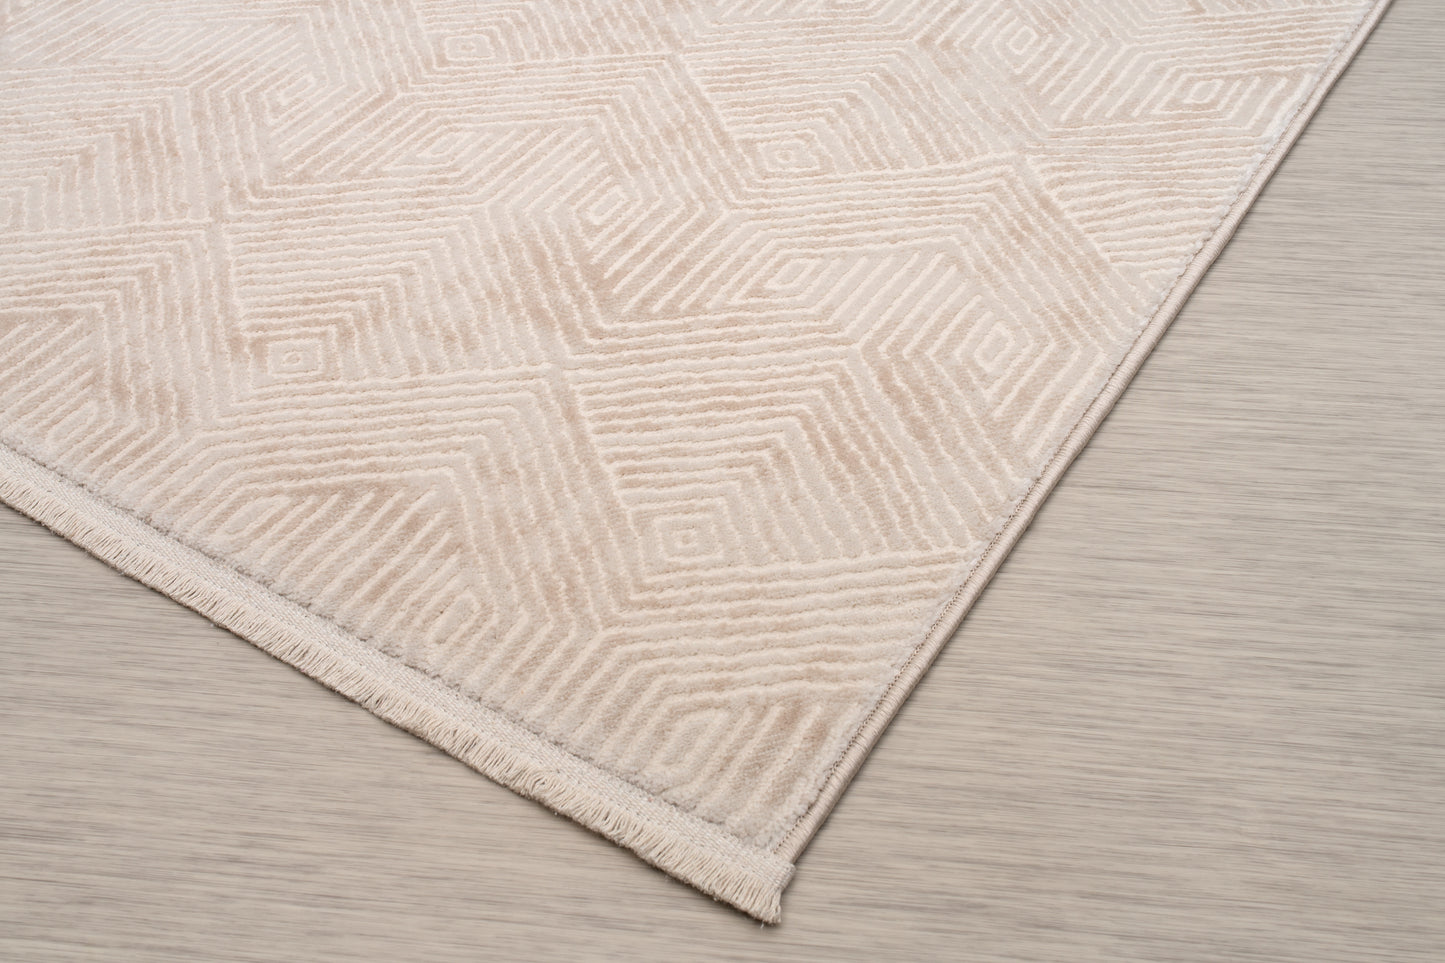 Ladole Rugs Geometric Pattern Room Decor Indoor Area Rug - Amazing Soft Premium Carpet for Living Room, Bedroom, Dining Room, Kitchen, and Office - Cream